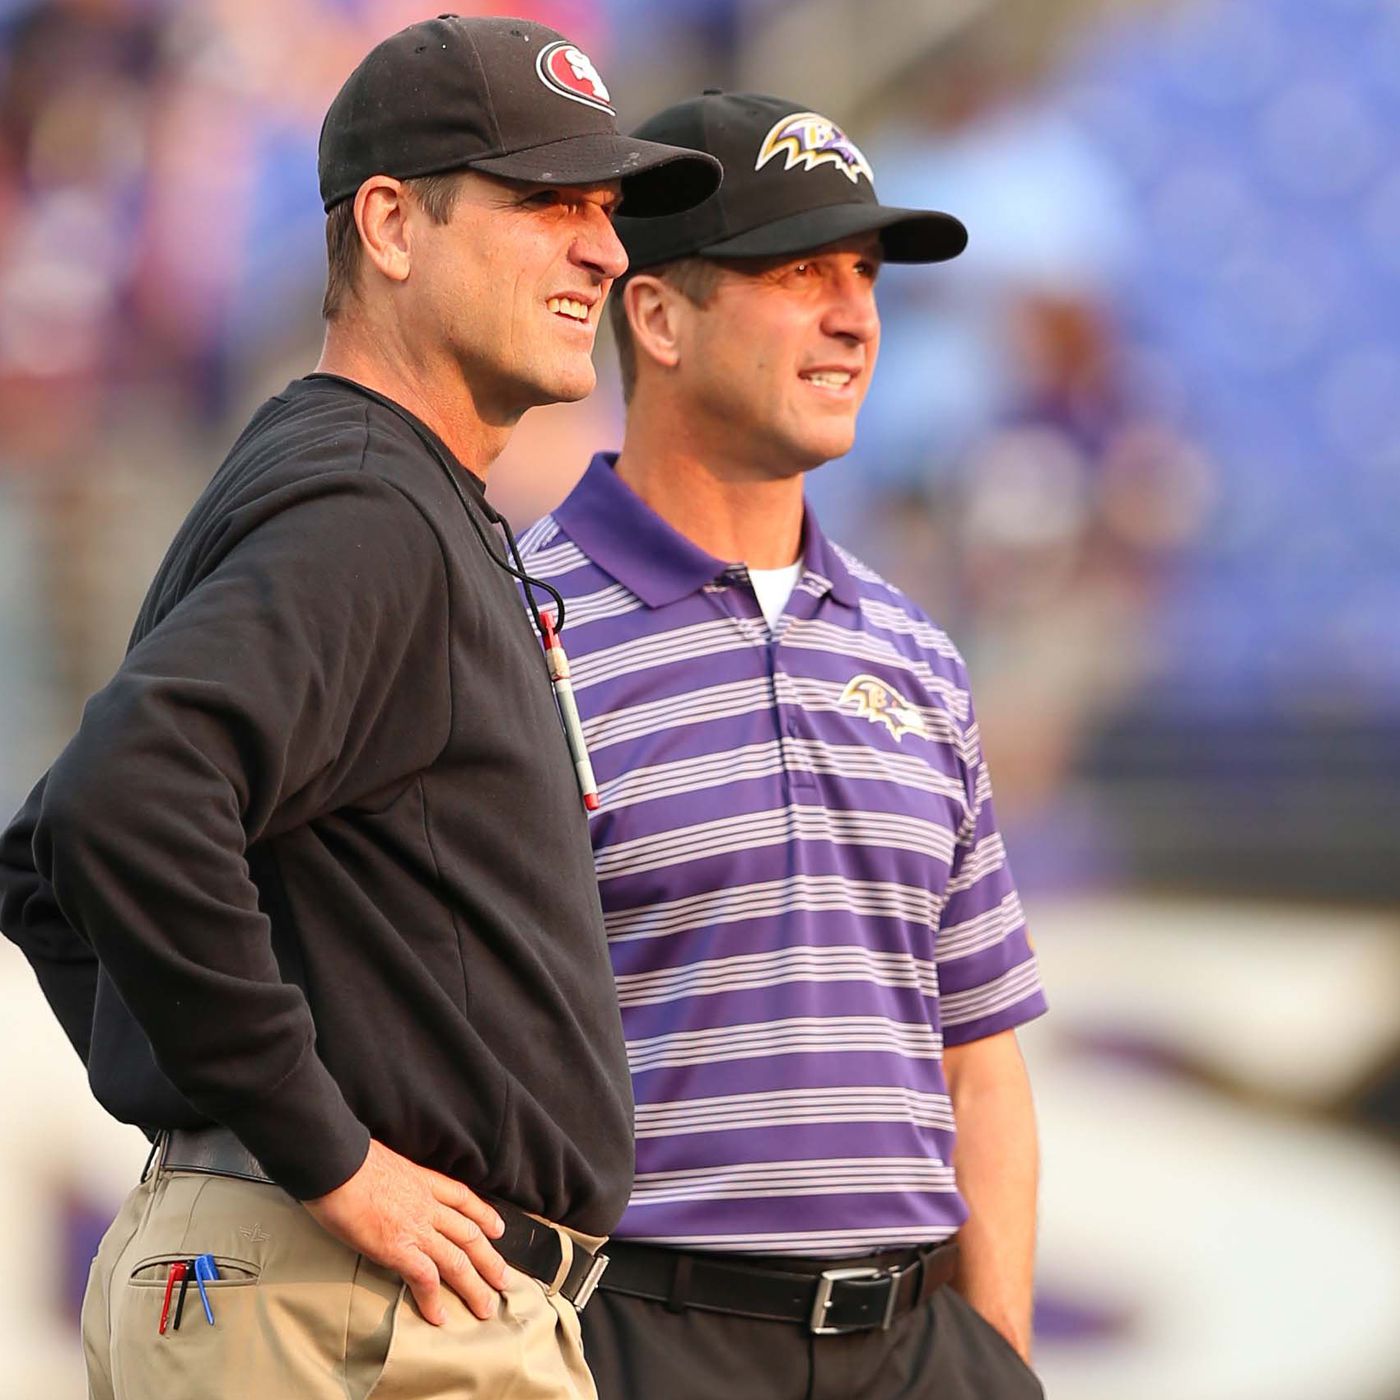 “Sibling Rivalry Turned Scandal! John Harbaugh Drops Clues on Ravens’ Unsettling Sign-Stealing Tactics – NFL Under Fire!”